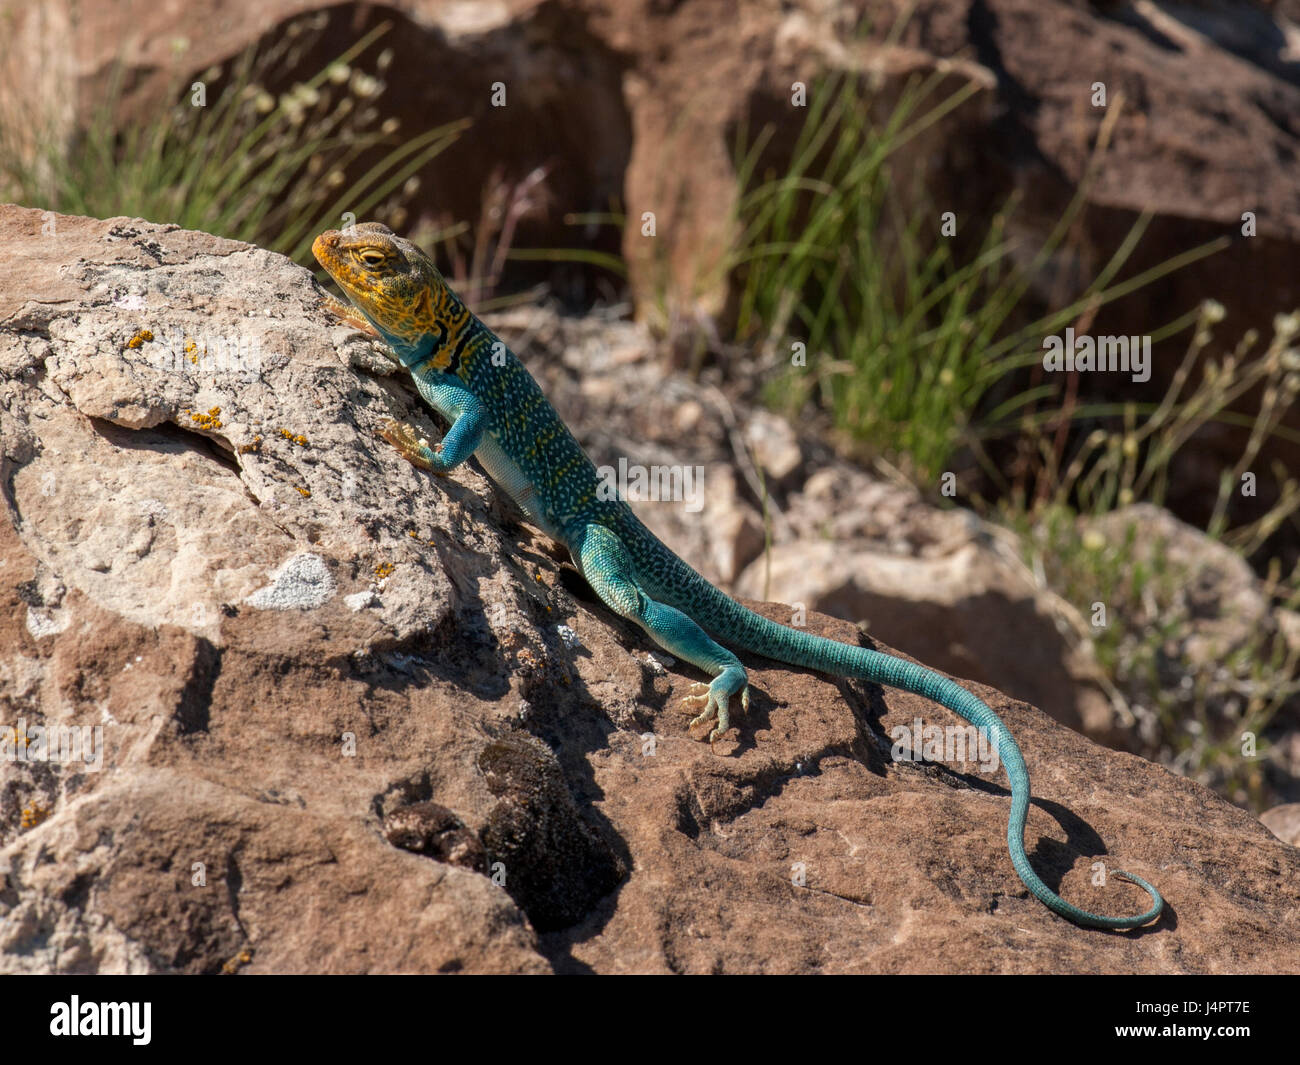 A male Collared Lizard (Crotaphytus collaris), a common denizen of the deserts of the American Southwest. Stock Photo